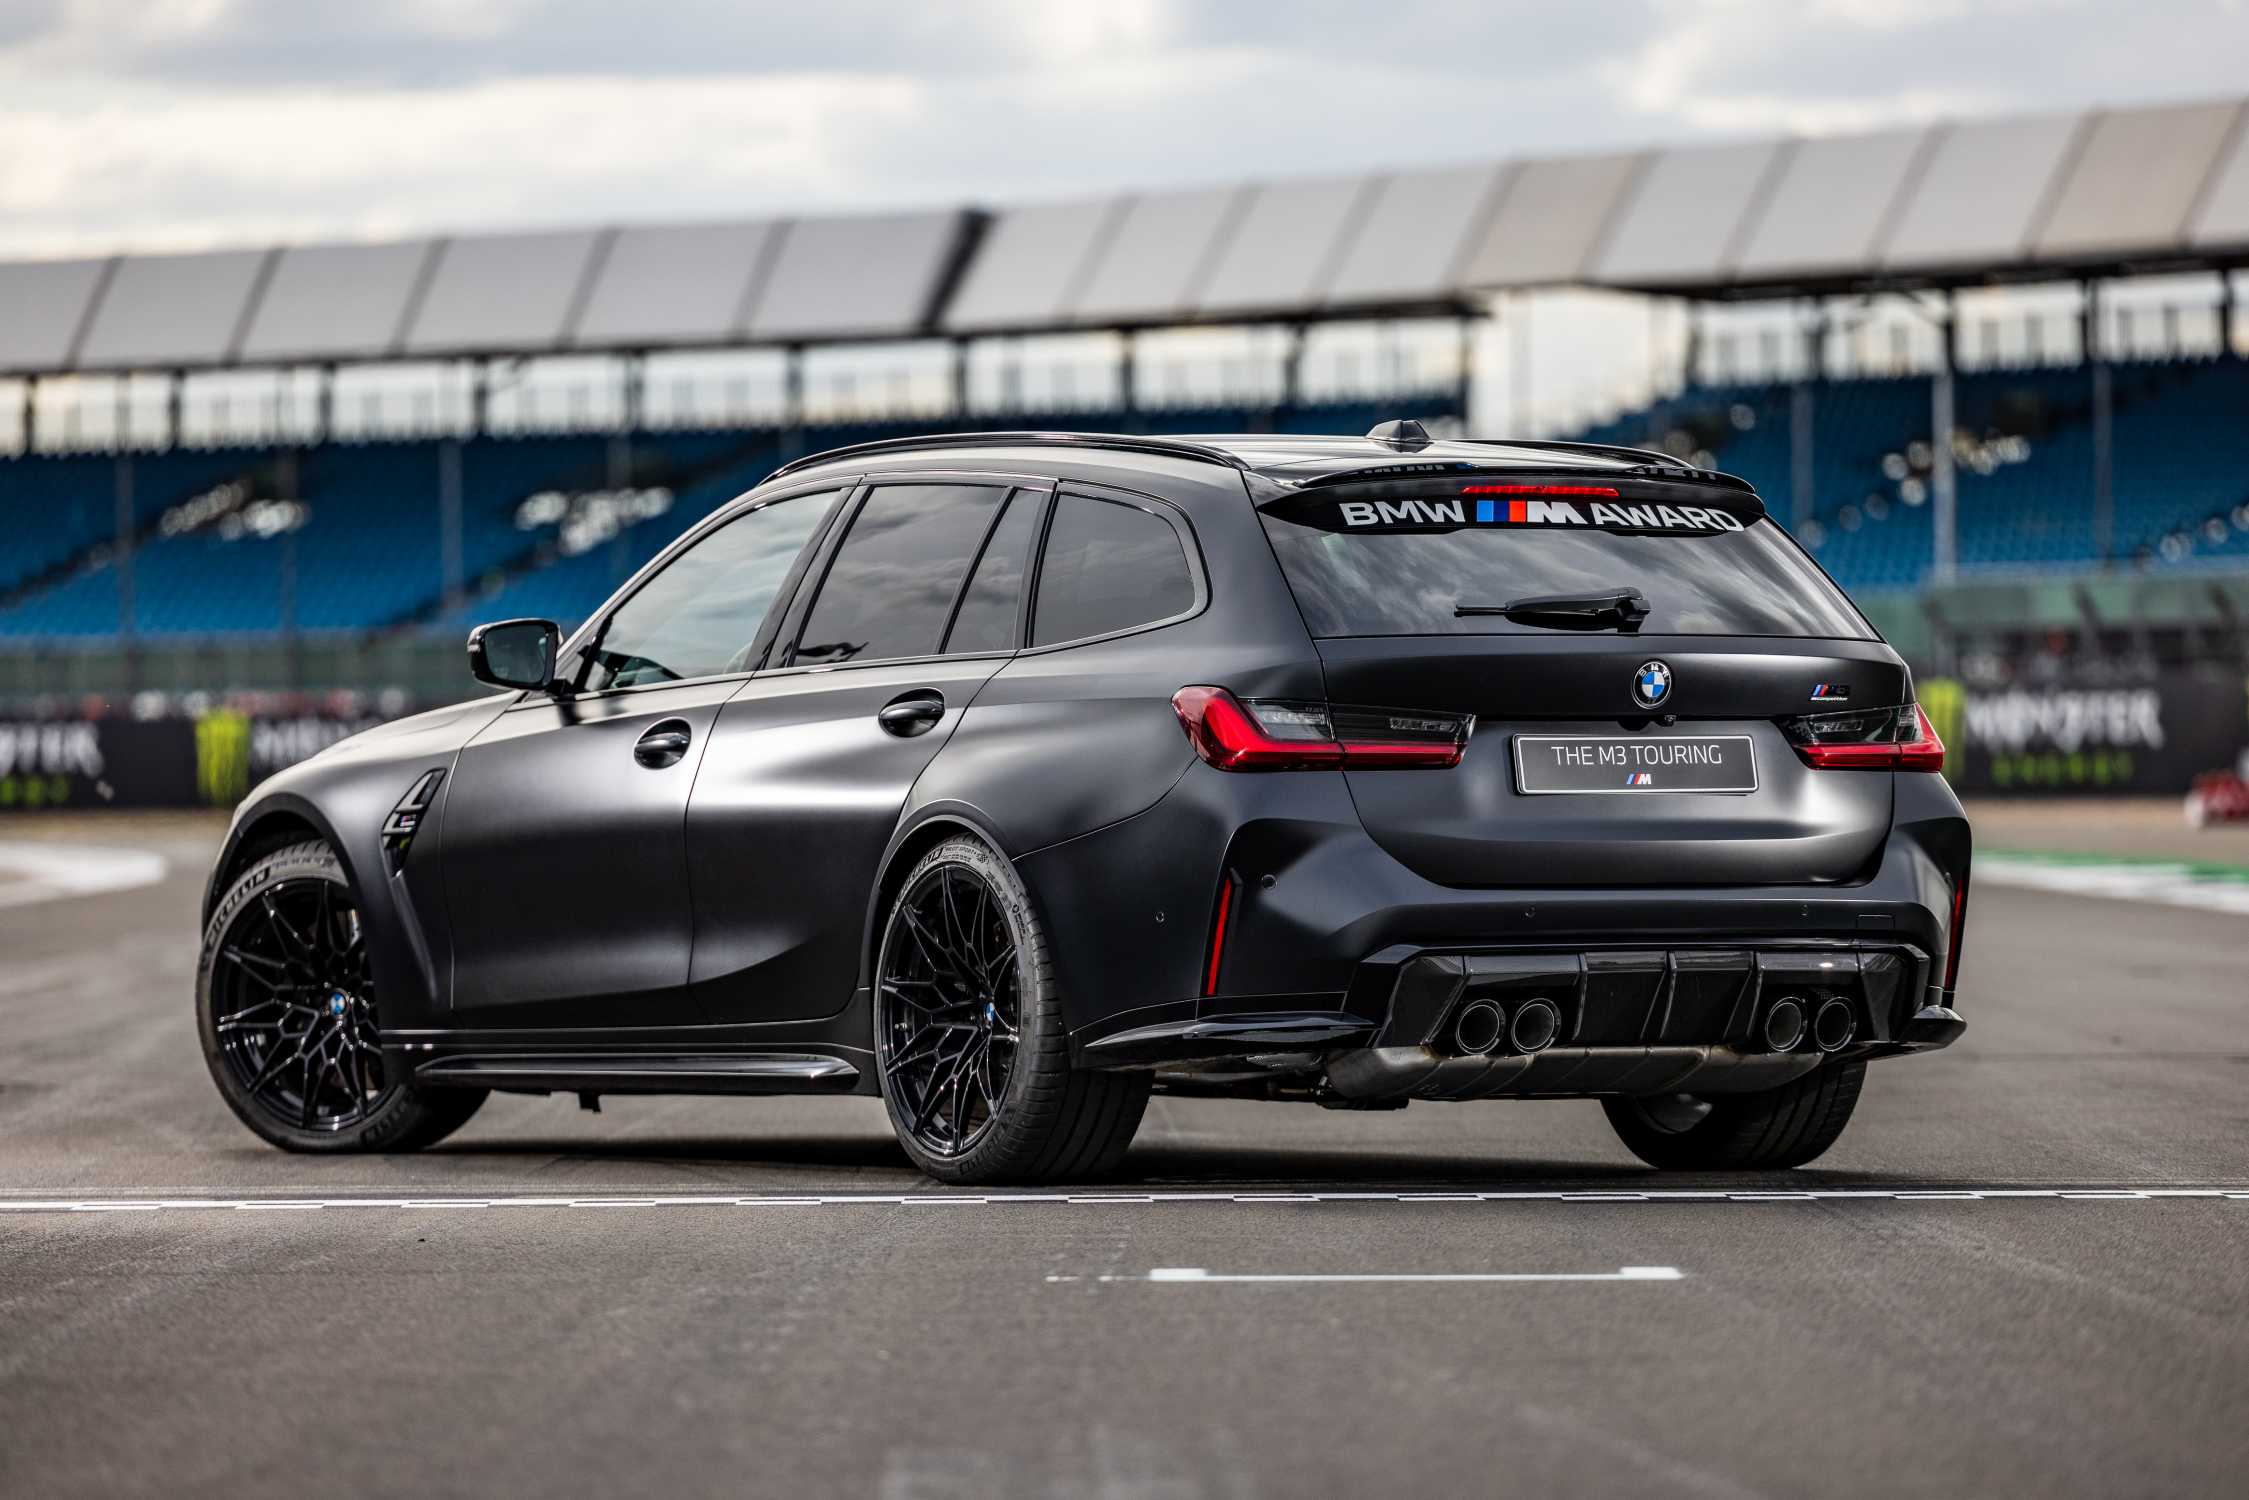 Silverstone (GBR), 5th August 2022. BMW M GmbH, 2022 BMW M Award, MotoGP™. Winner's car BMW M3 Competition Touring with xDrive.